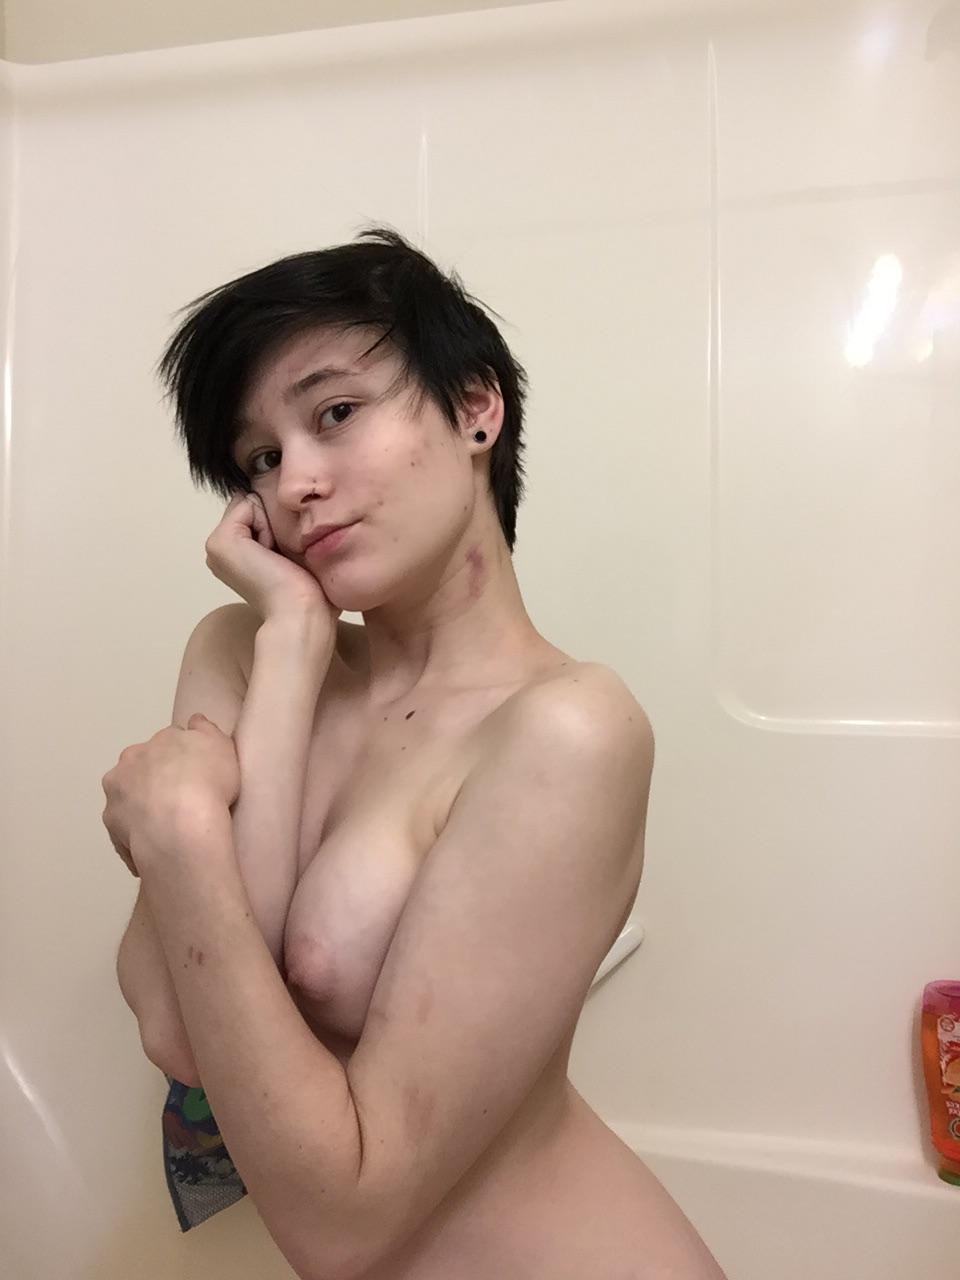 Happy holidays everyone! Have another free newdie! (As if that’s a gift, hahah!) Enjoy the fluffy hair and some bare skin! -nico